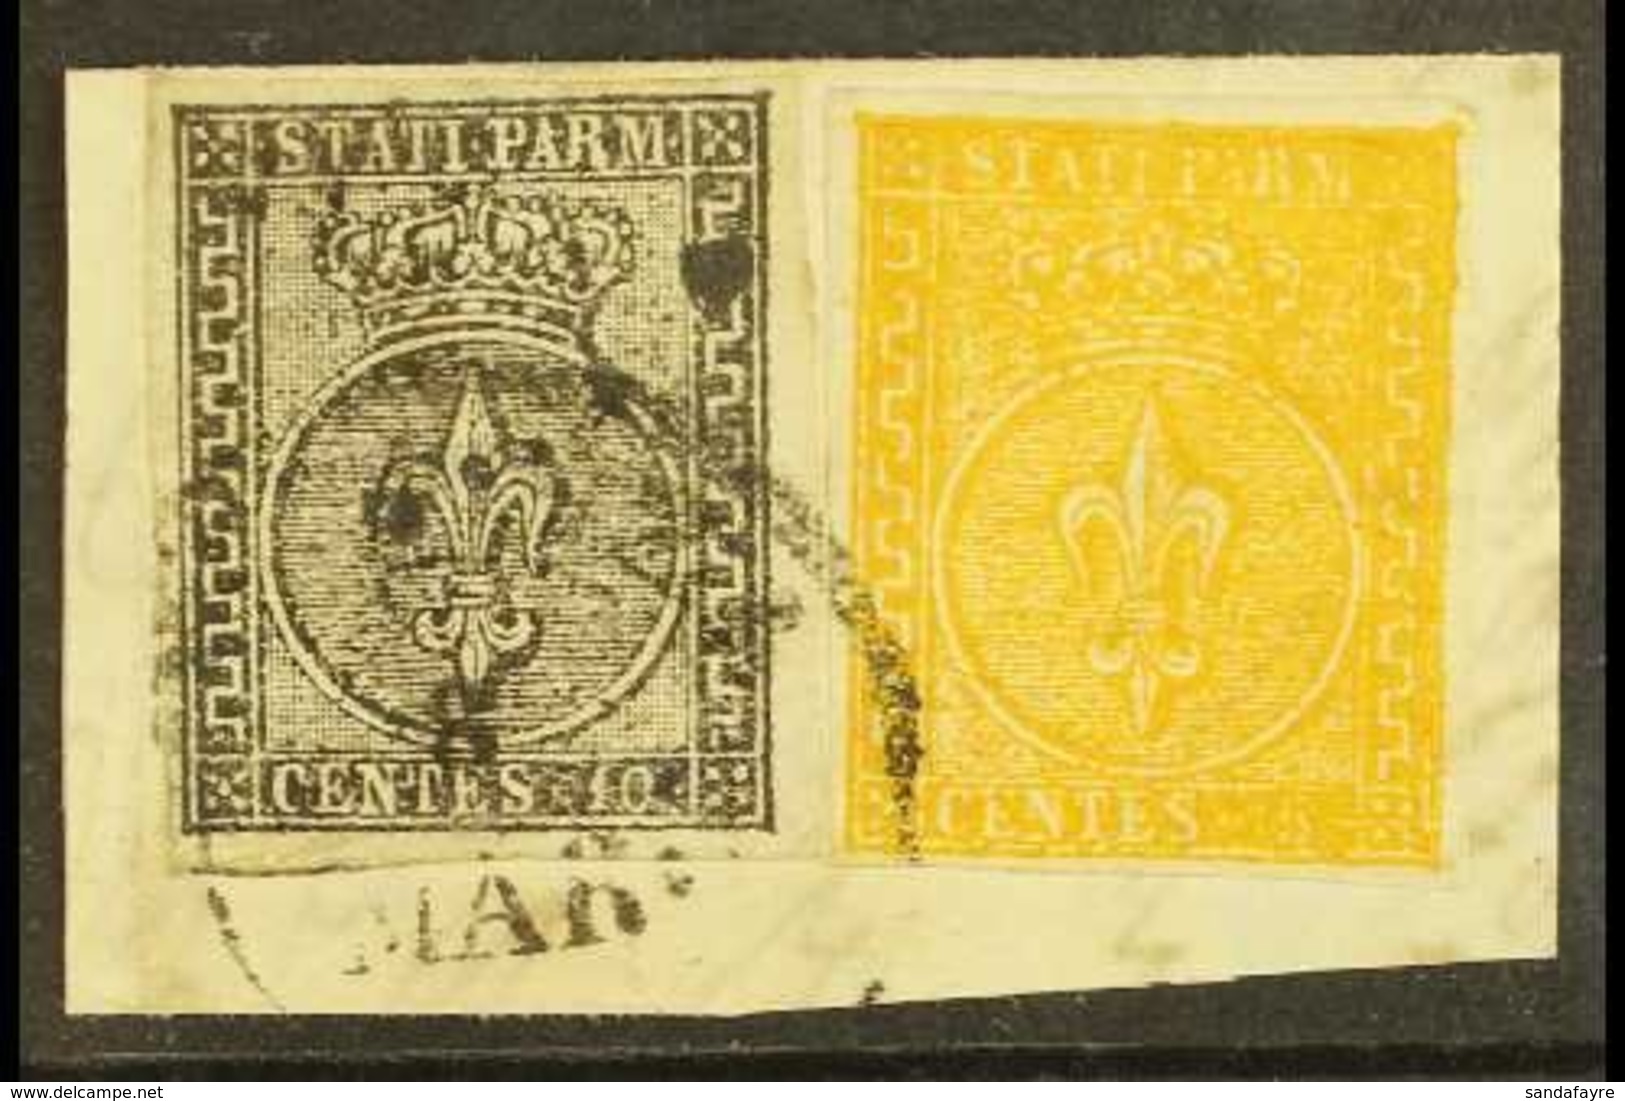 PARMA 1852 10c Black On White And 1853 5c Orange Yellow, Sass 2+6, Very Fine Used Together On Piece Tied By Piacenza 6 M - Sin Clasificación